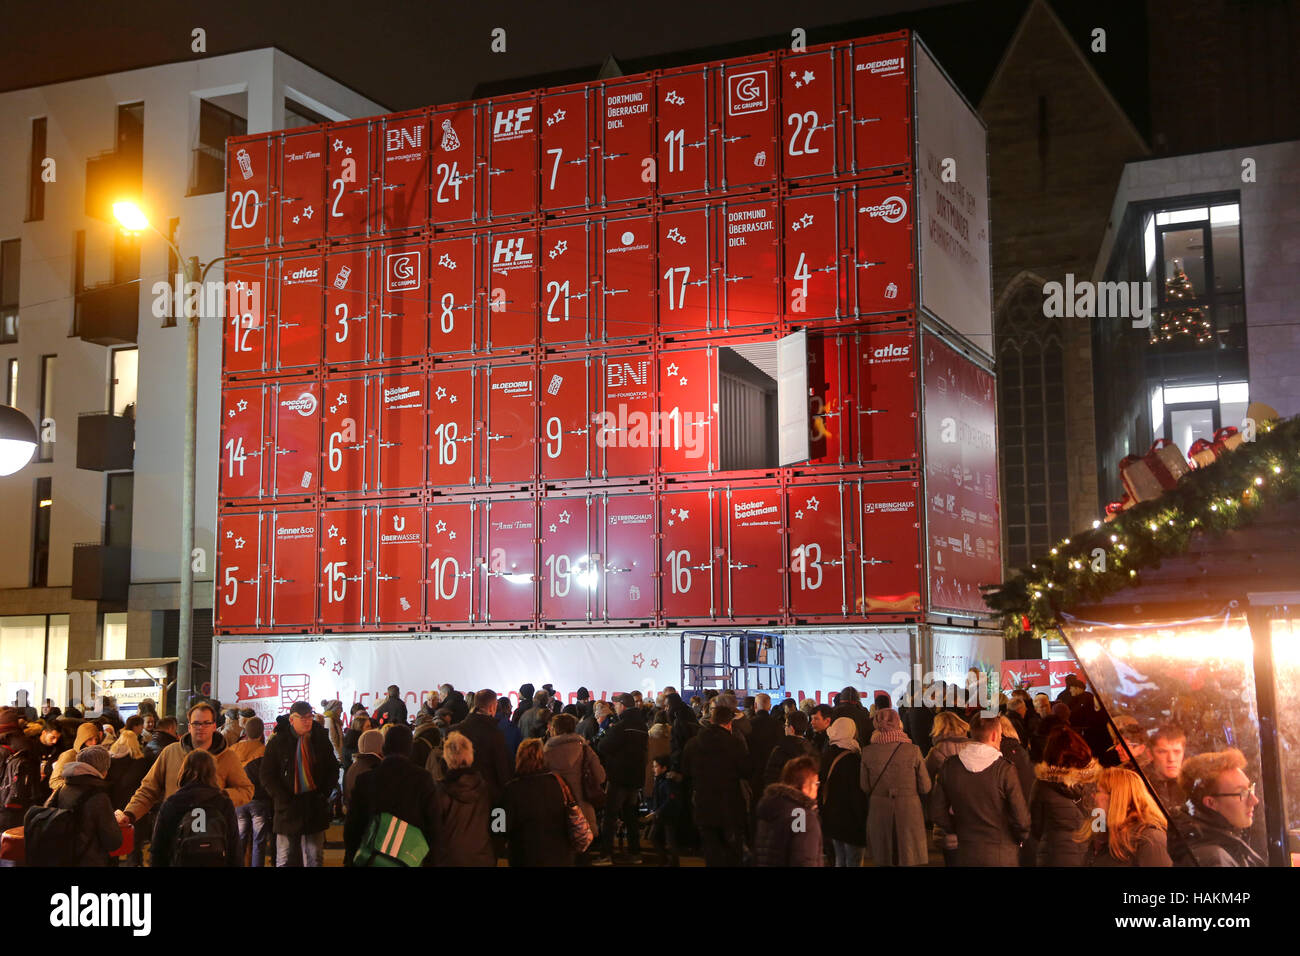 Dortmund/Germany, Dec.1th 2016. The first door has been  opened at the supposedly largest Advent calendar of the world. Made of 30 ship containers the Advent calendar is 15 x 13 meters in size and has a total weight of 64 tonnes. Behind the first door was a voucher for the furnishing of a children's home in Dortmund. From December 1th onwards, a Christmas child will open a door every day at 18:00 from above a lifter. Stock Photo